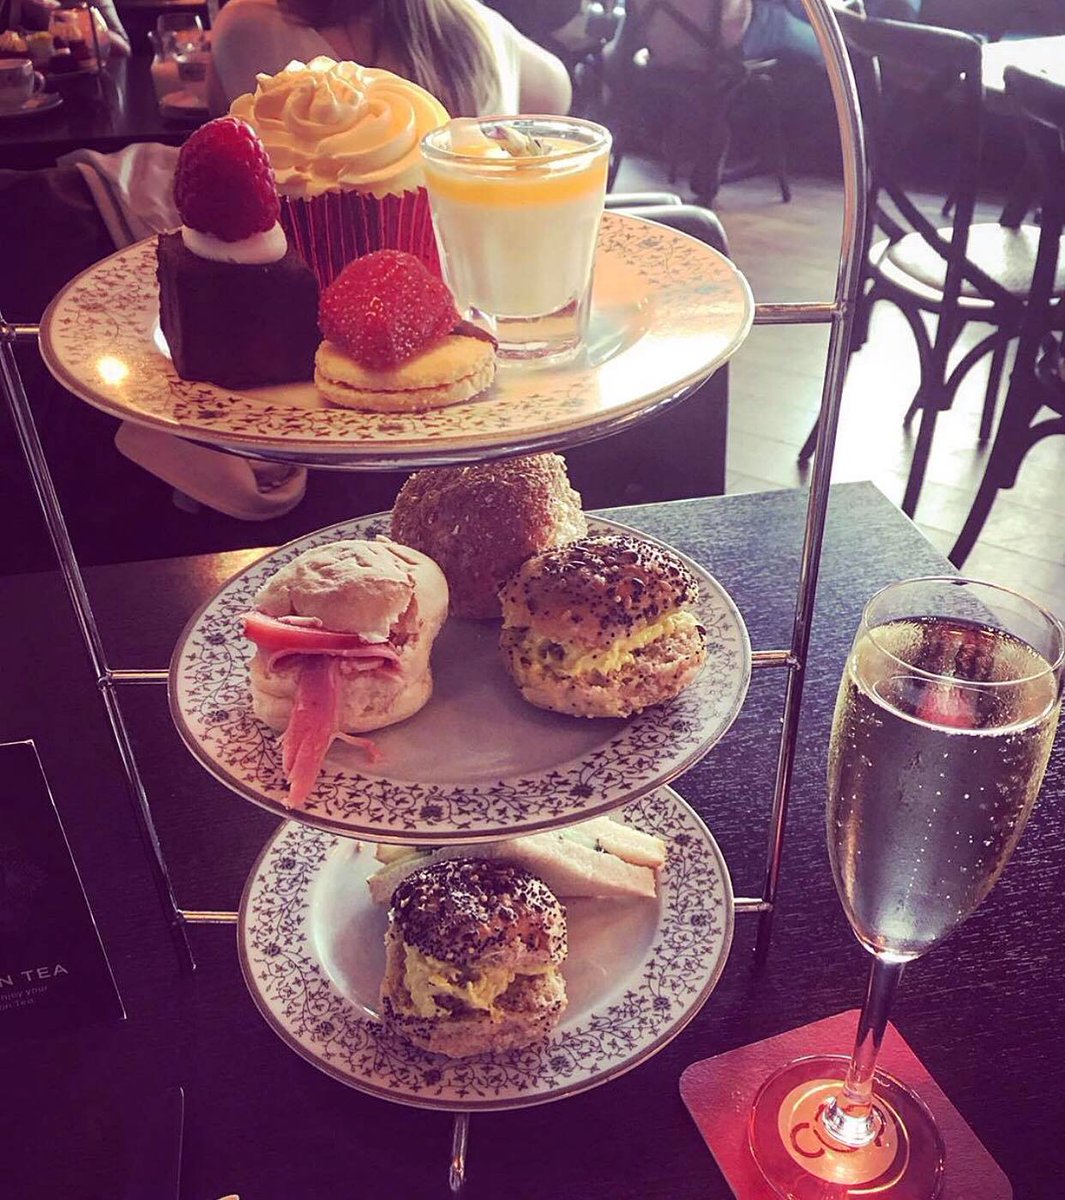 Book a package at The Gin Spa and enjoy an afternoon tea and glass of prosecco at Cup Tea Rooms! 🥂🧁 To book, email contact@ginspa.co.uk